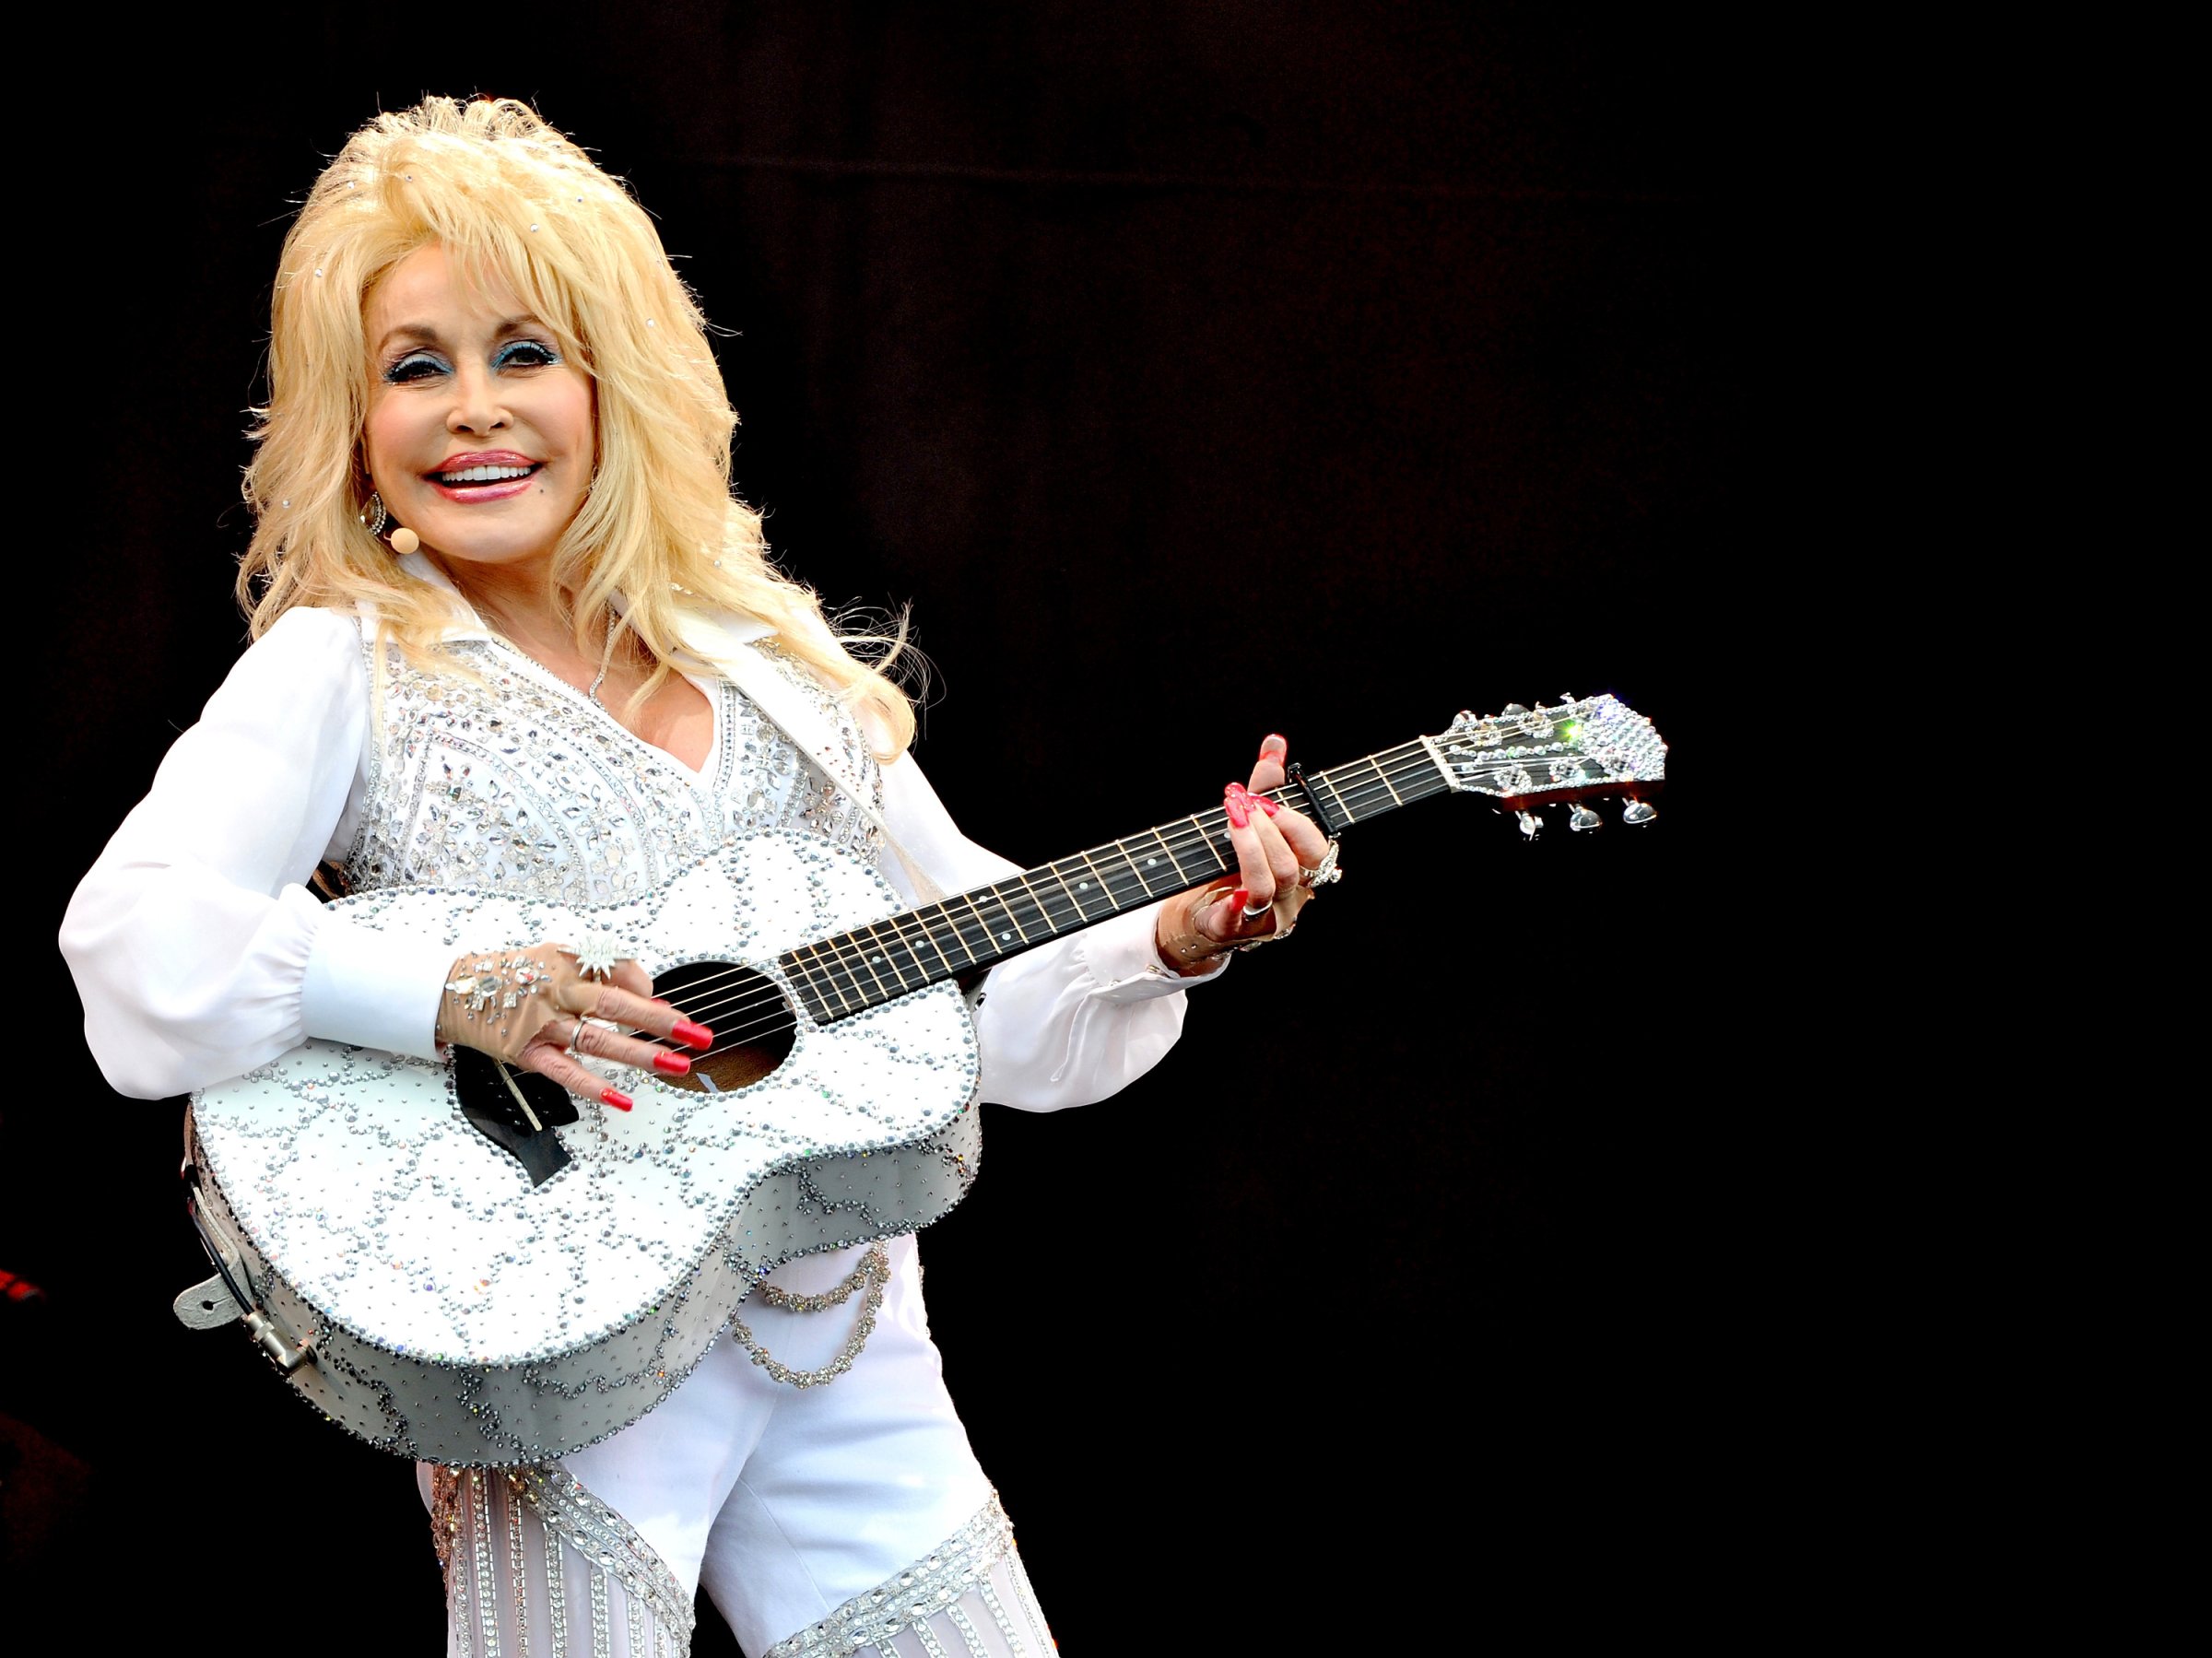 Dolly Parton performs on The Pyramid Stage on Day 3 of the Glastonbury Festival at Worthy Farm on June 29, 2014 in Glastonbury, England.